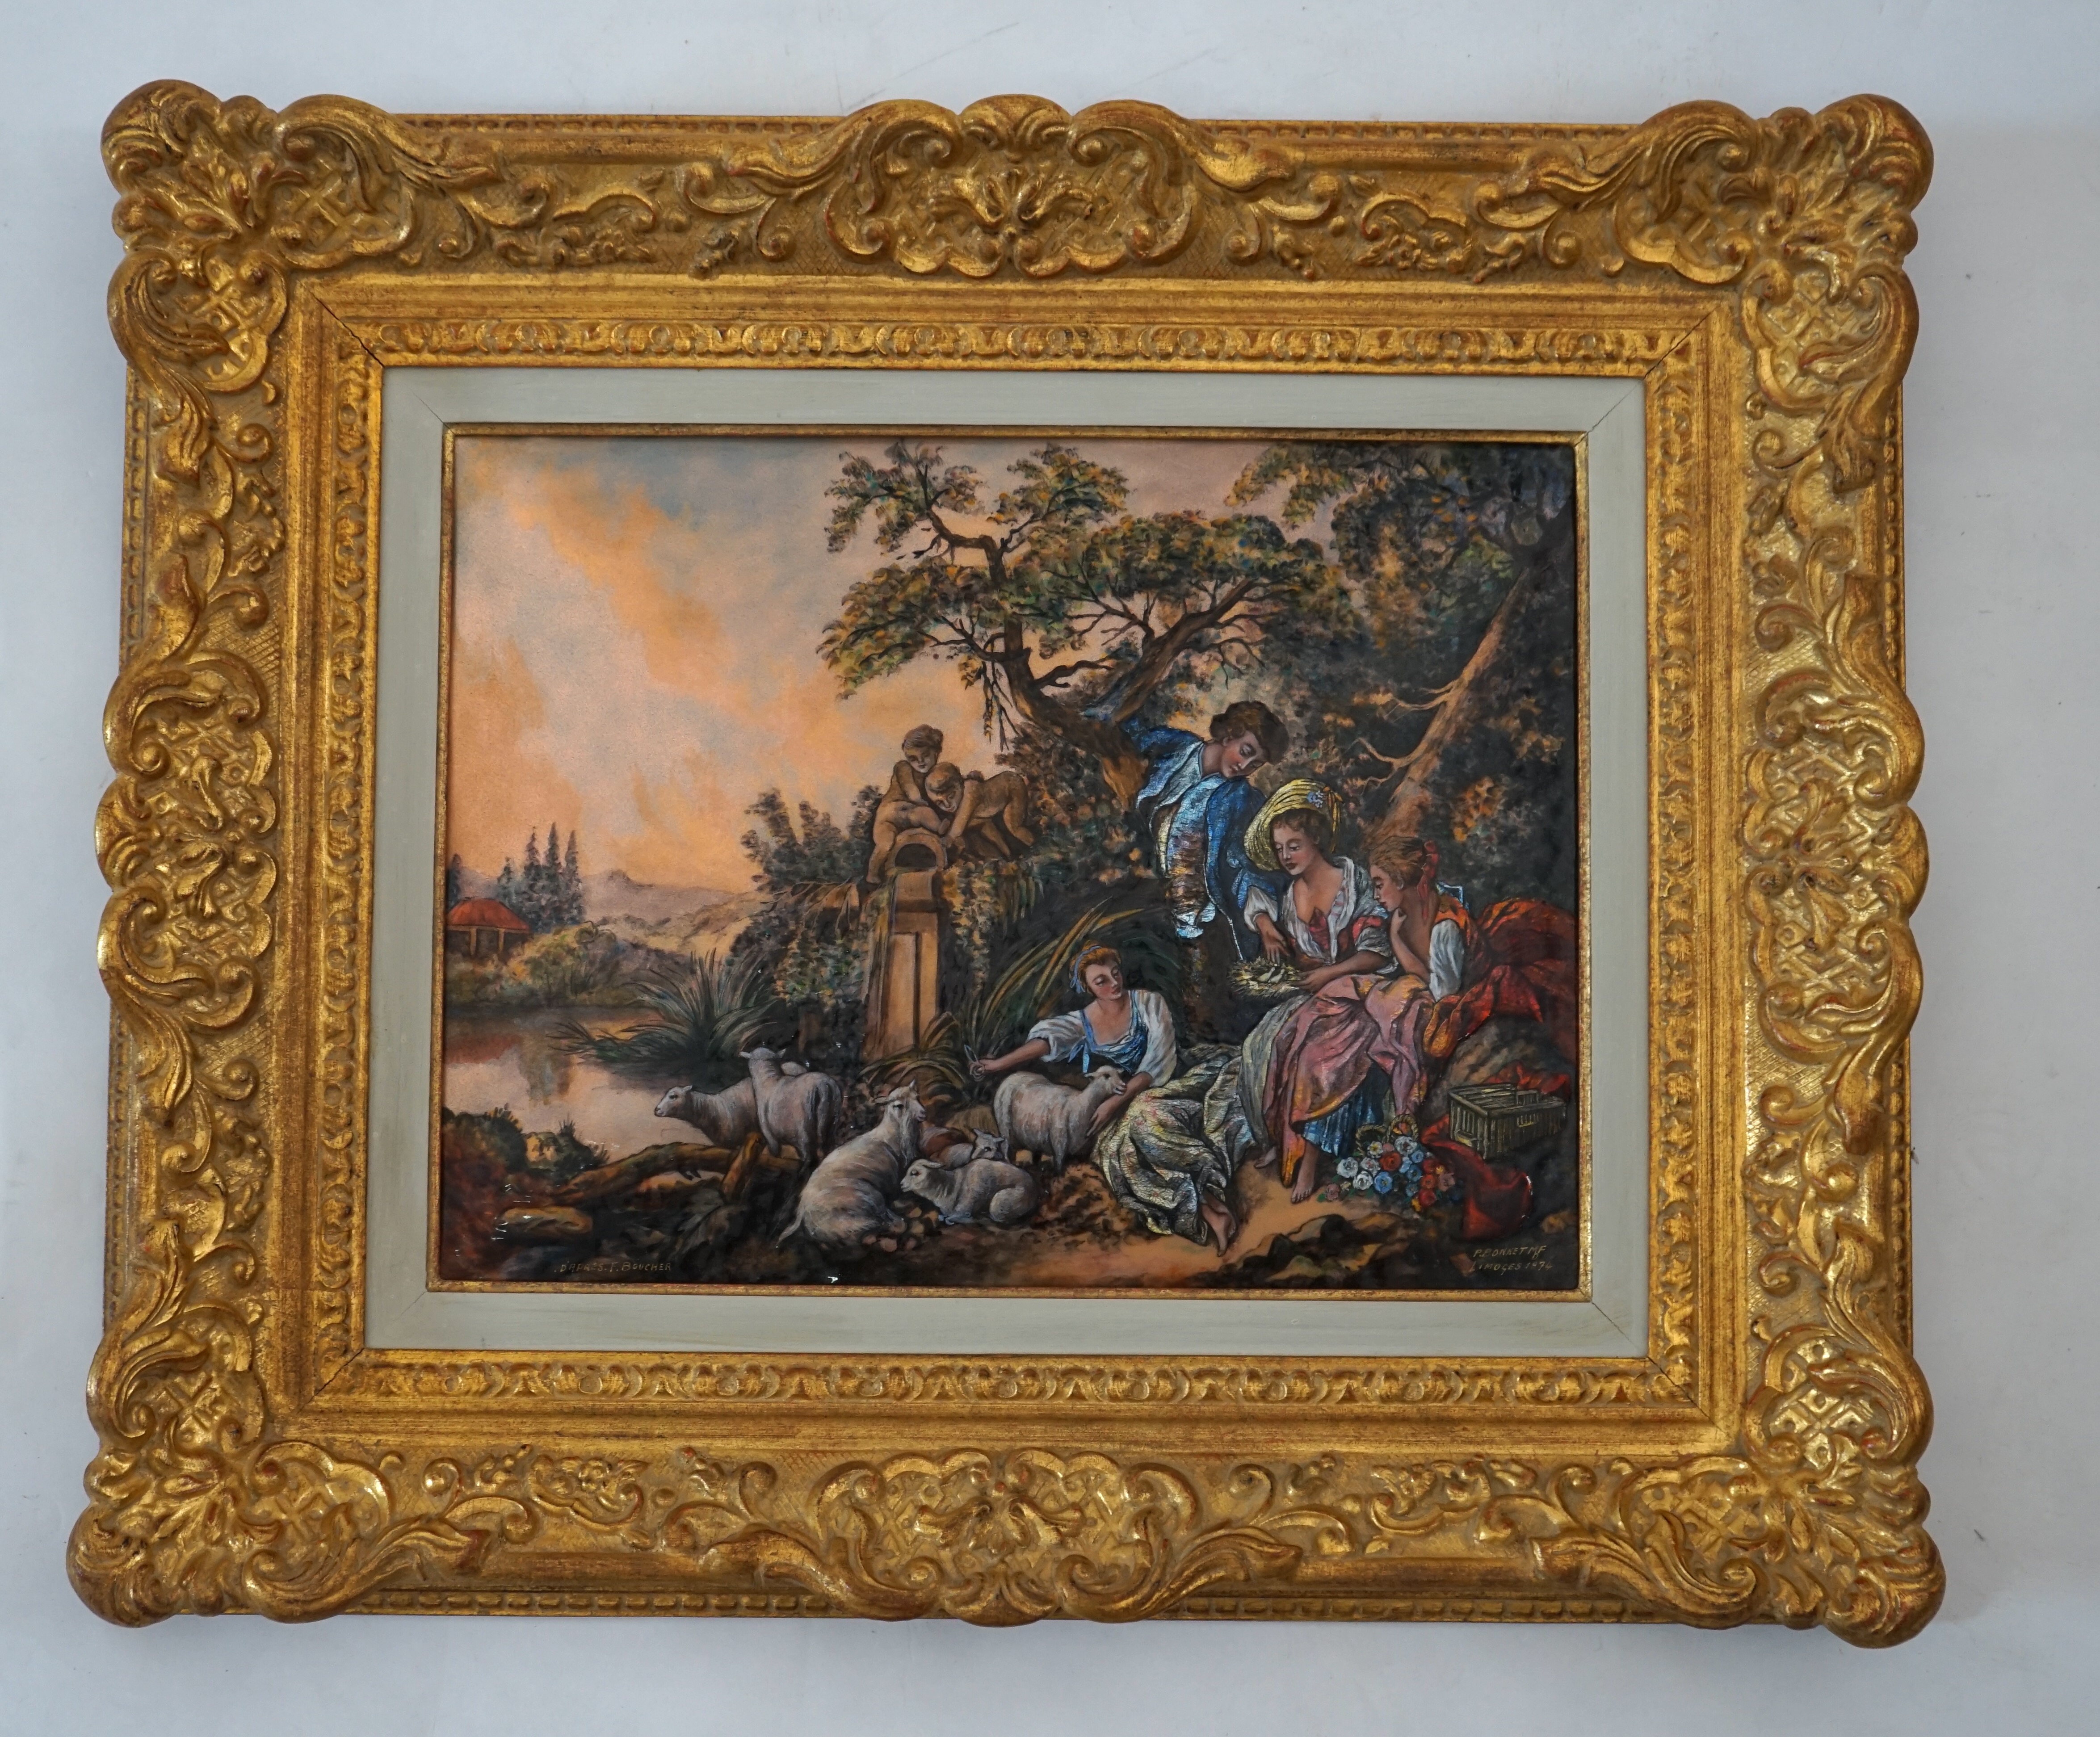 Pierre-Henri Bonnet after Boucher, a Limoges enamel plaque depicting an 18th century lady with birds nest, attendants and sheep, signed and dated 1974, 30 x 40cm. Condition - good